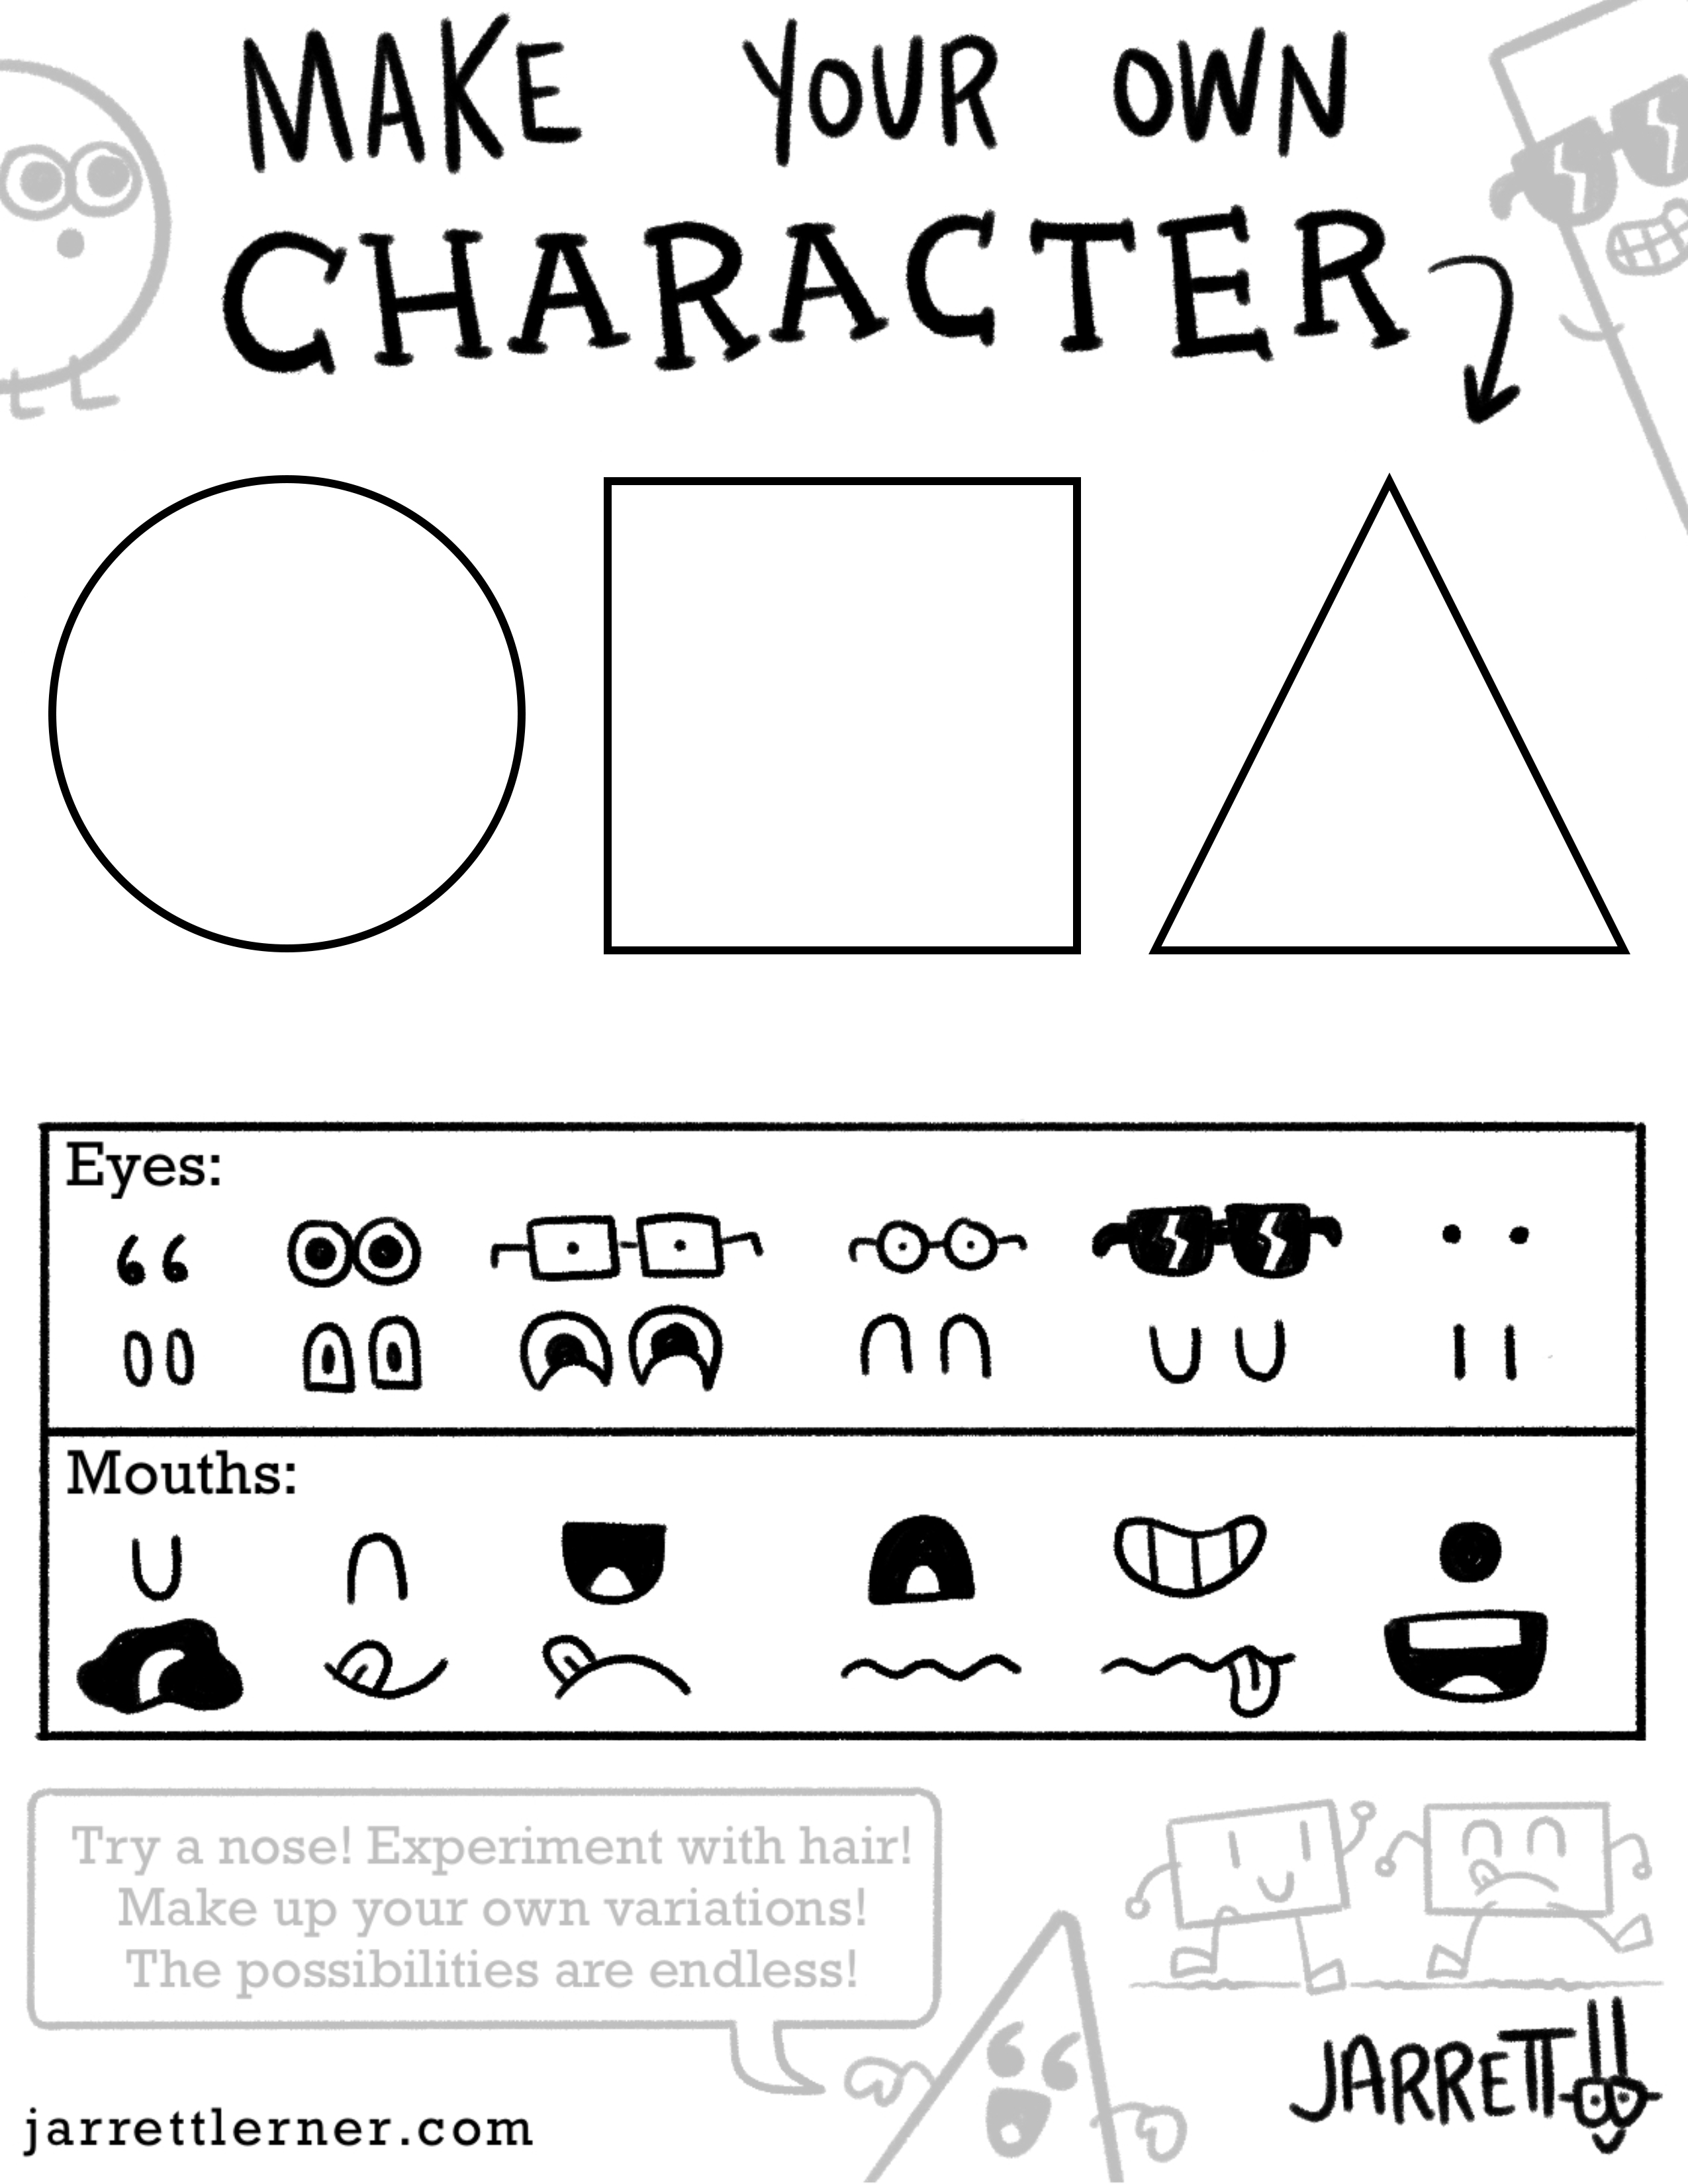 Character design using three base shapes and a variety of eyes and mouths